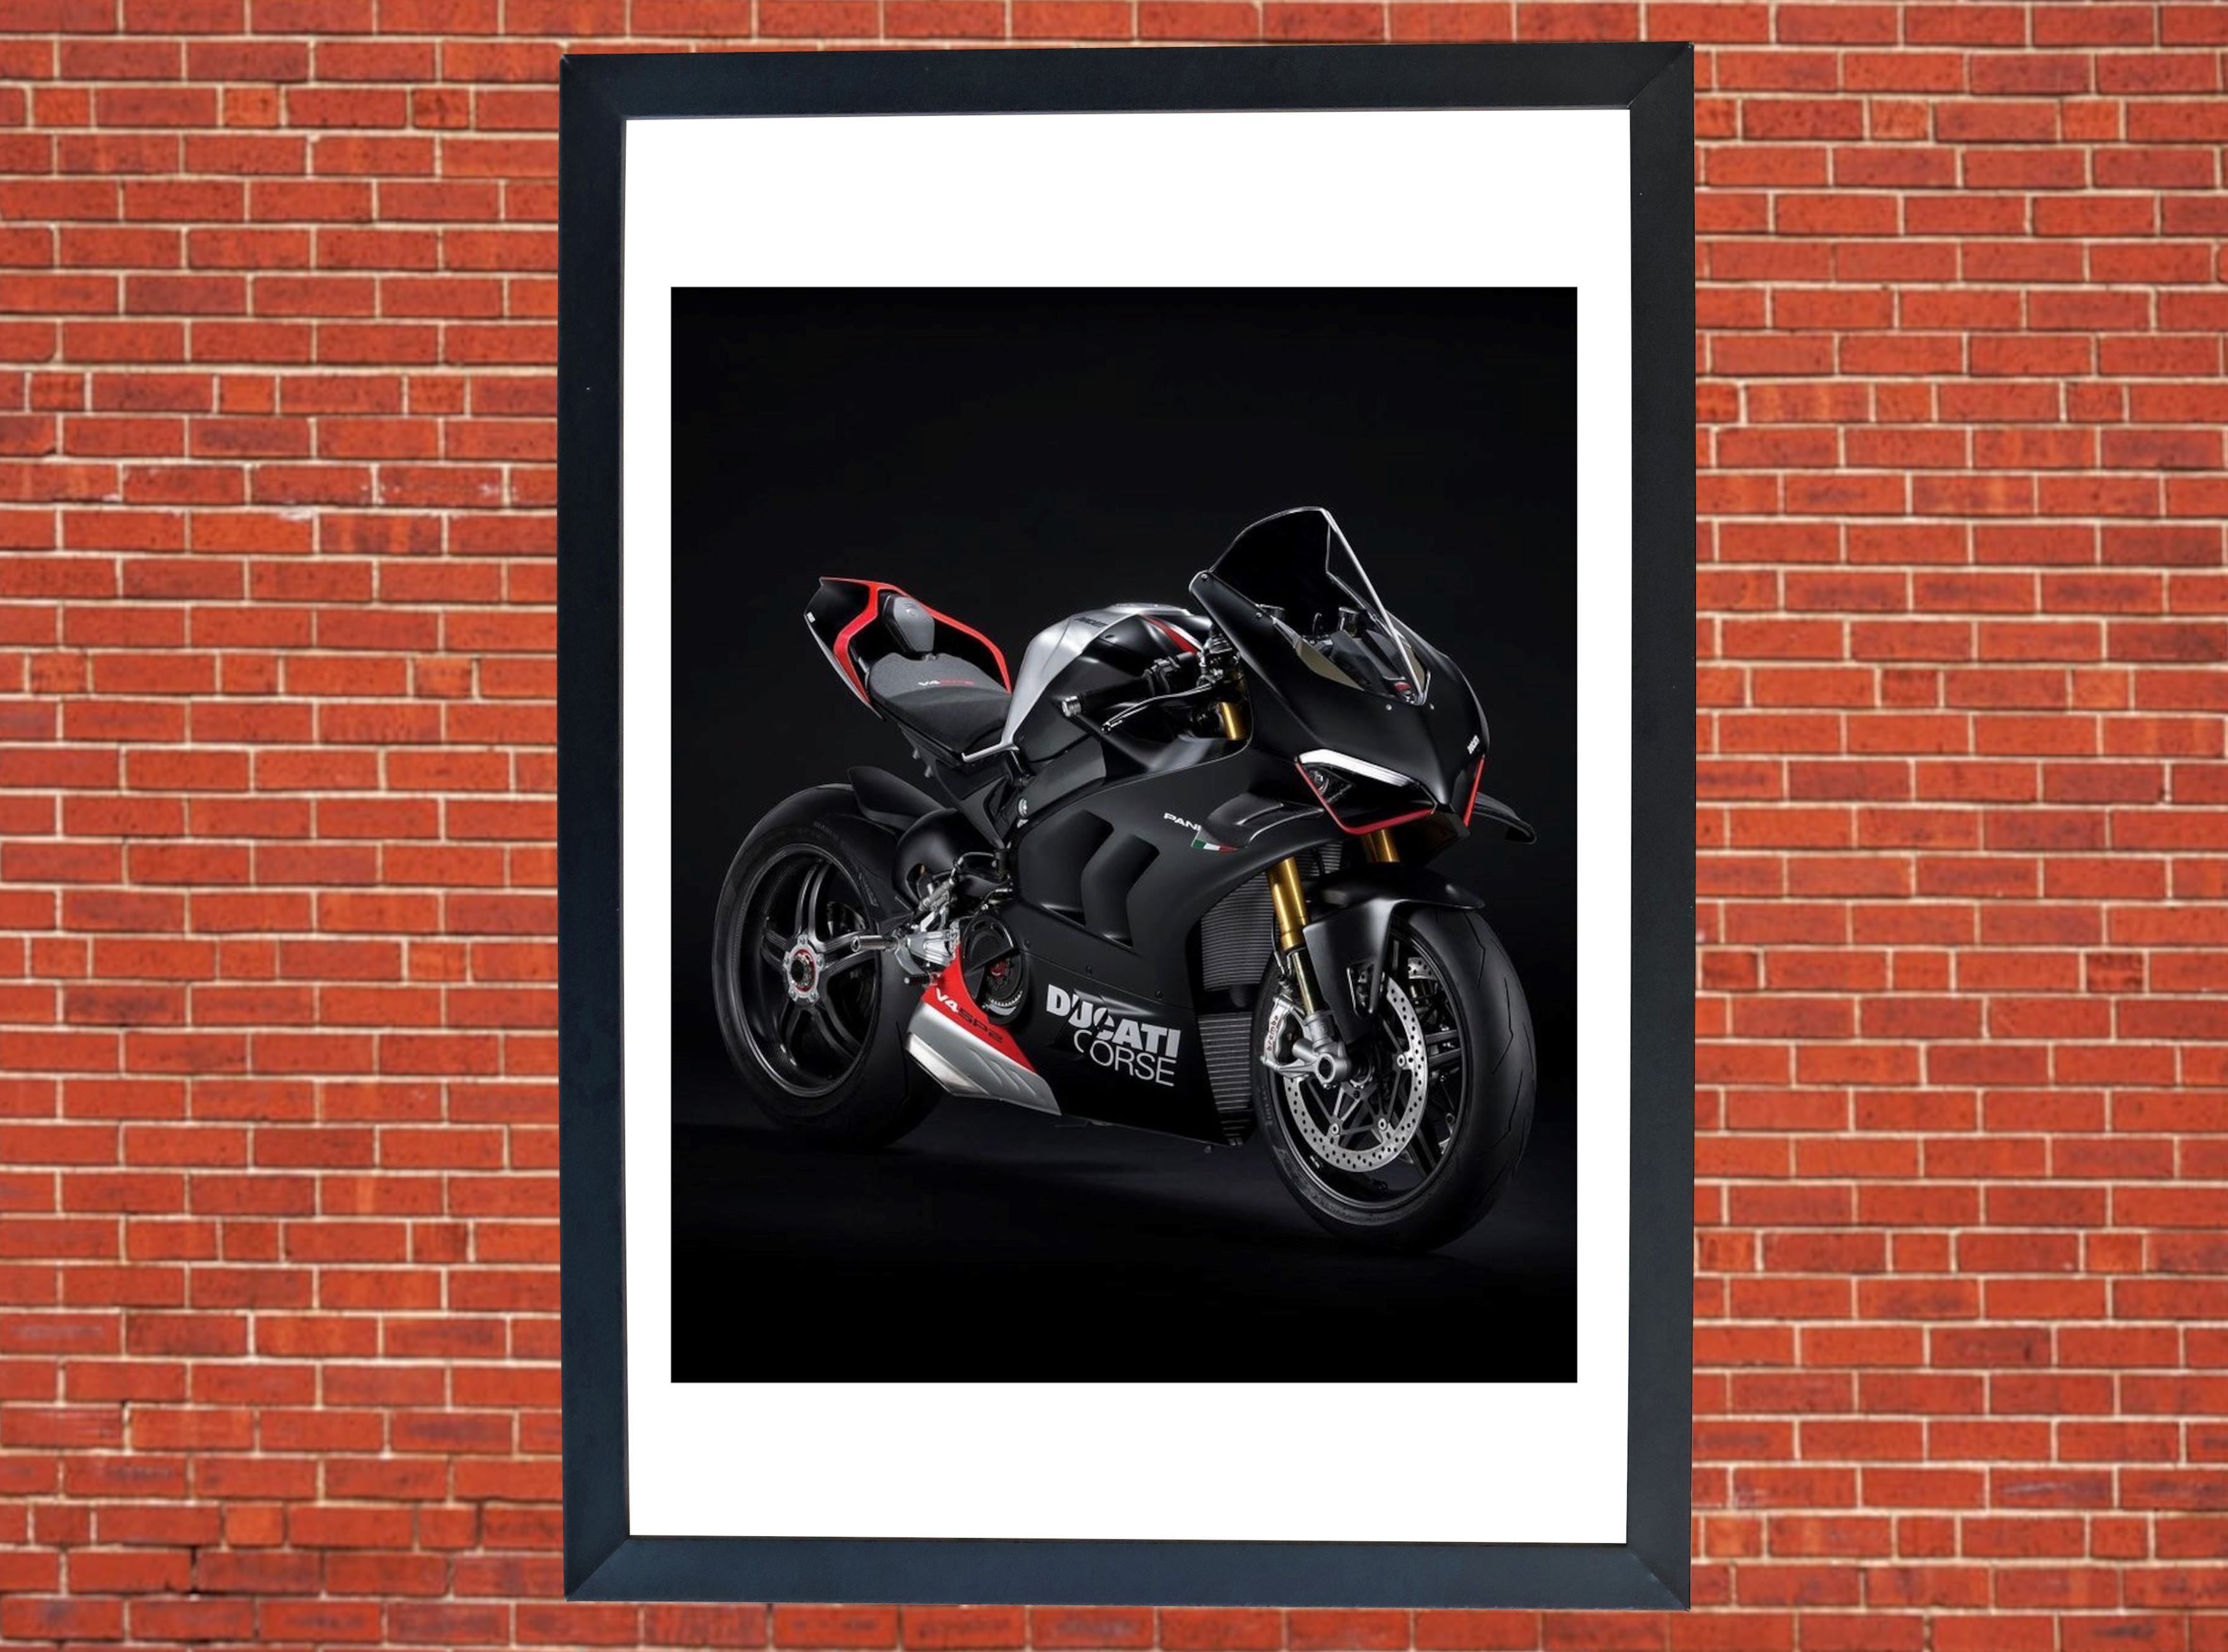 Ducati Corse Motorbike Motorcycle - A3/A4 Size Print Poster